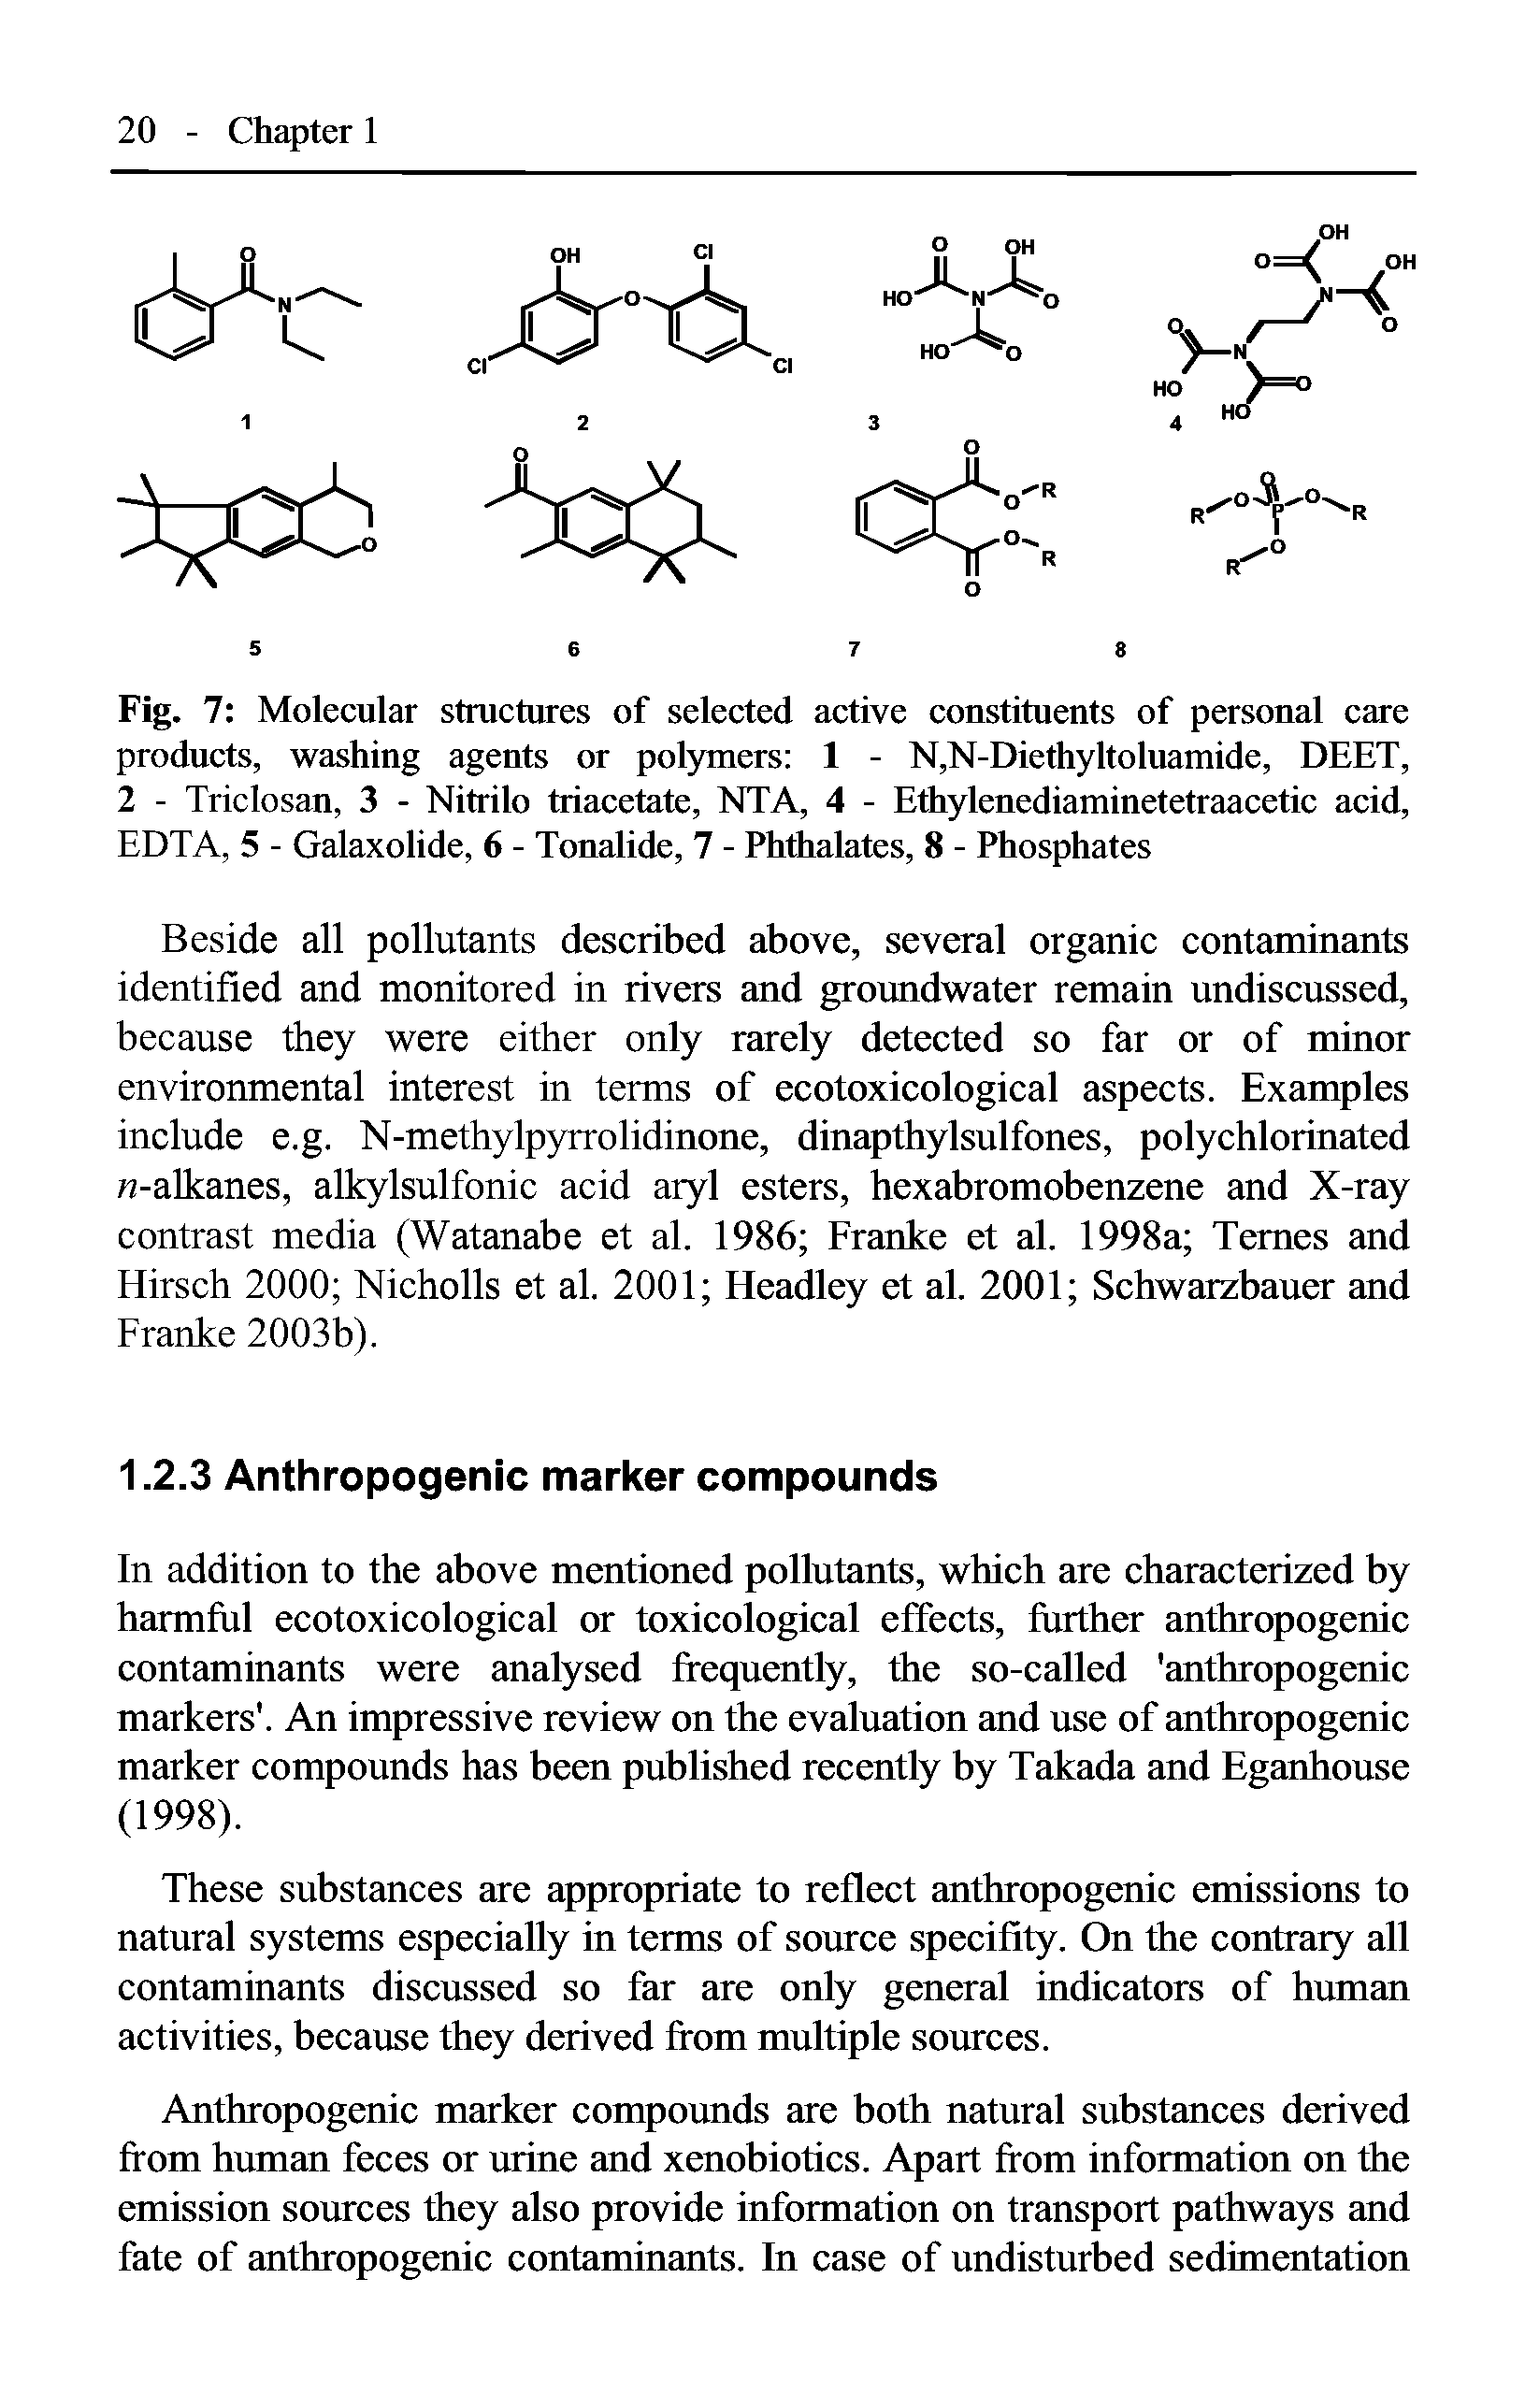 Fig. 7 Molecular structures of selected active constituents of personal care products, washing agents or polymers 1 - N,N-Diethyltoluamide, DEET, 2 - Triclosan, 3 - Nitrilo triacetate, NTA, 4 - Ethylenediaminetetraacetic acid, EDTA, 5 - Galaxolide, 6 - Tonalide, 7 - Phthalates, 8 - Phosphates...